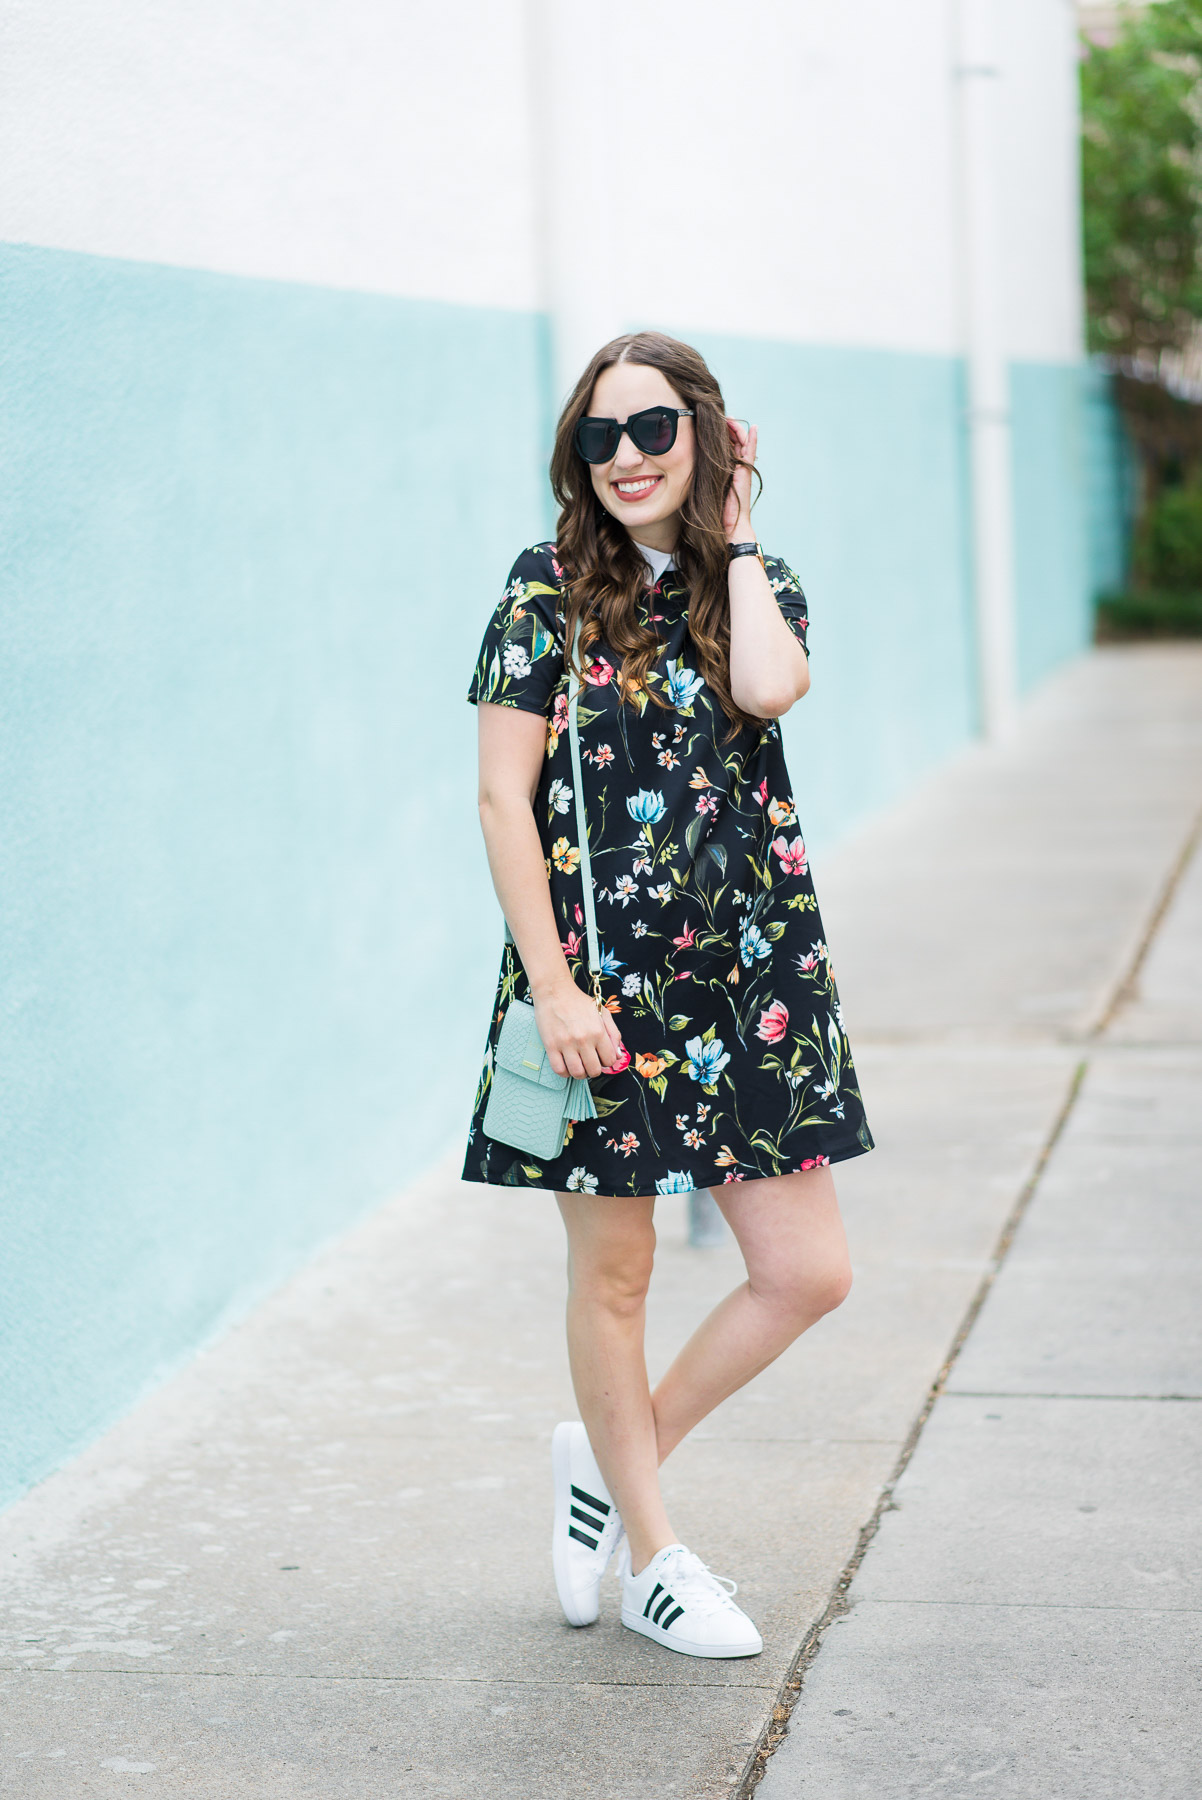 Floral Mini Dress + Sneakers | Lone Star Looking Glass